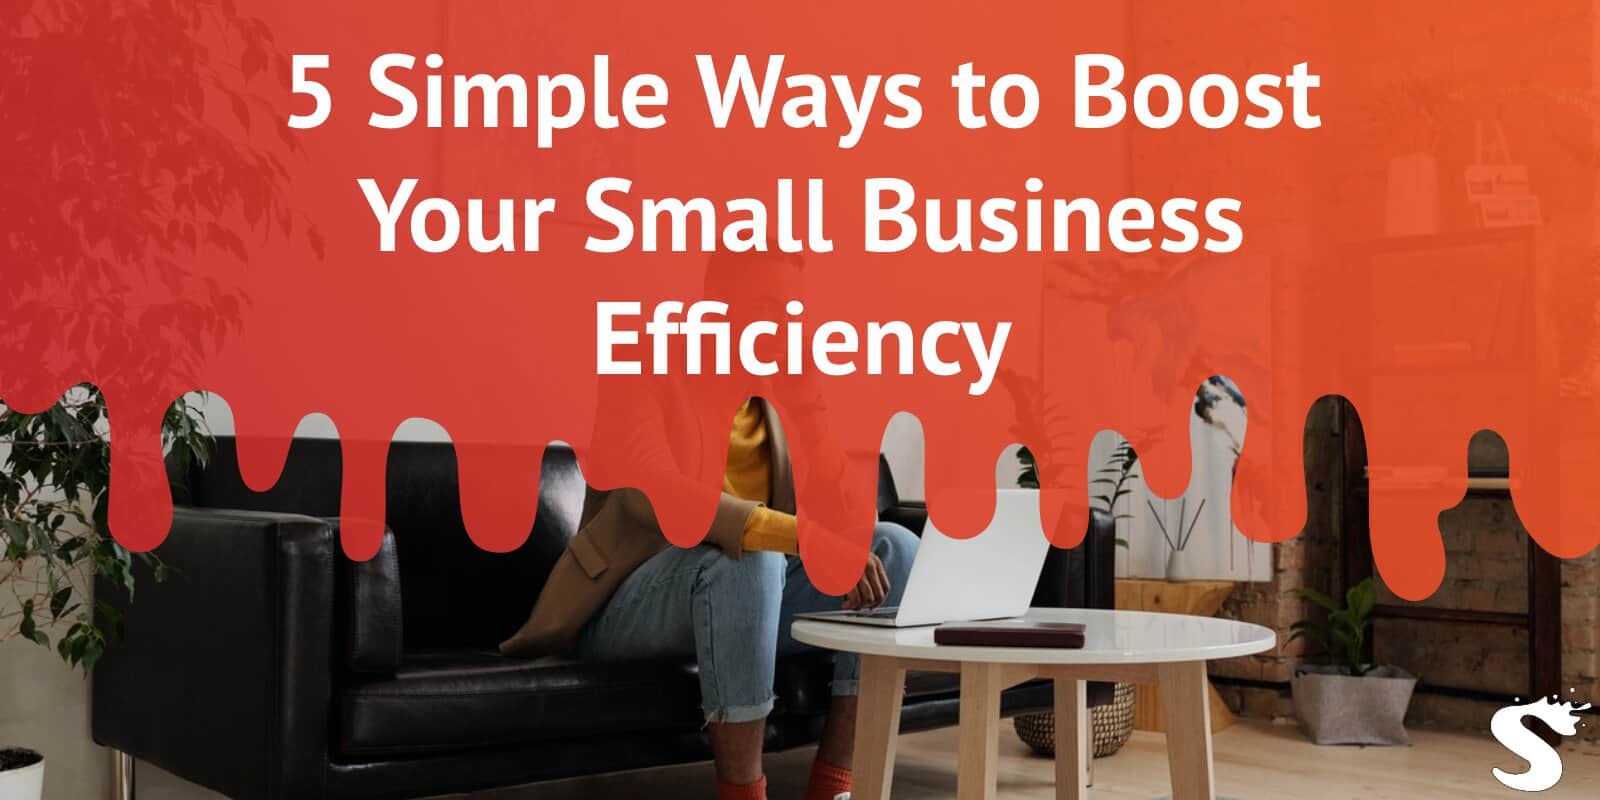 5 Simple Ways to Boost Your Small Business Efficiency